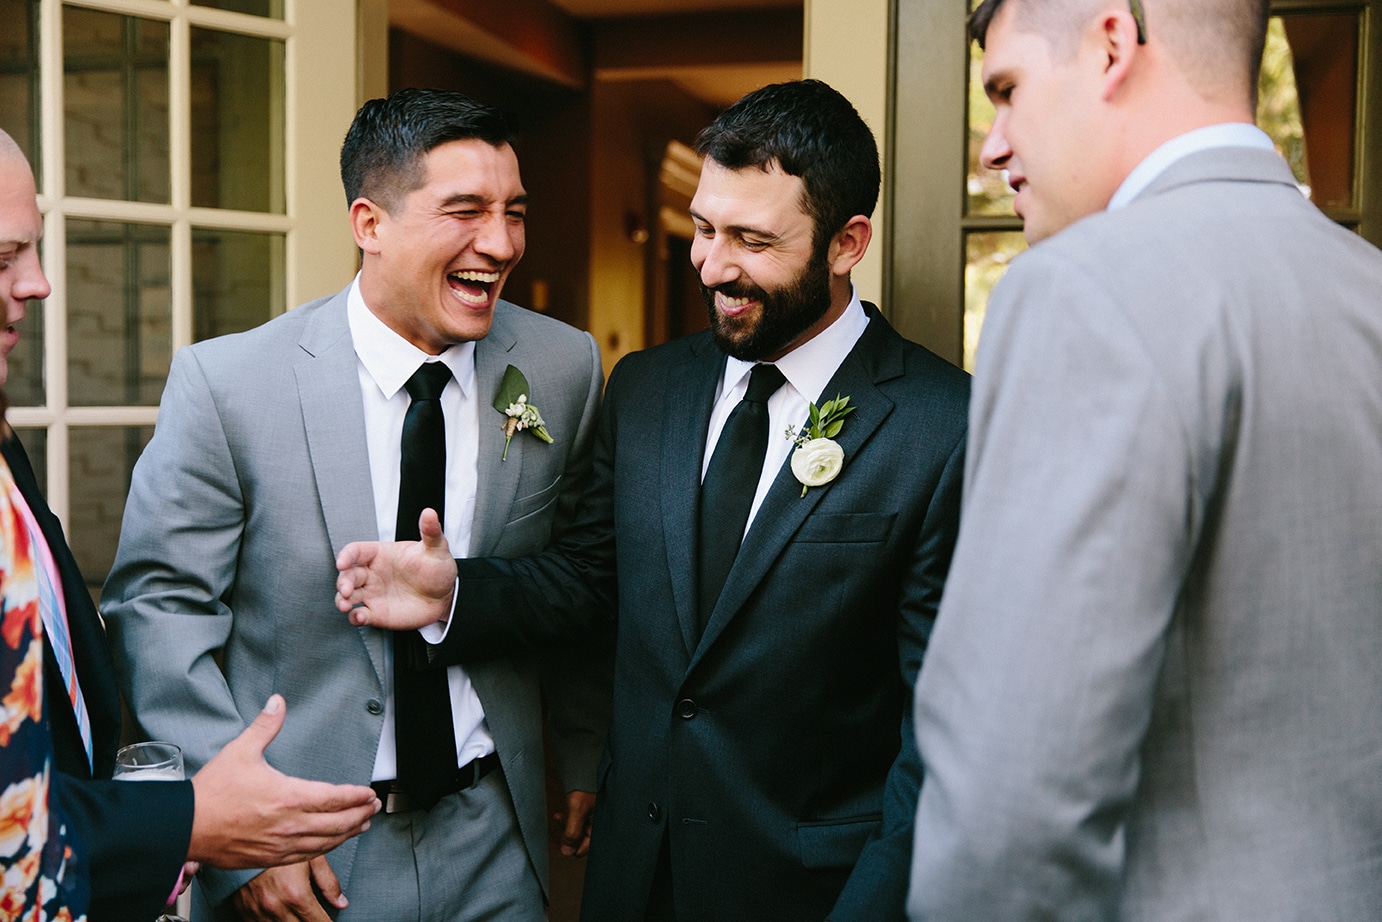 This photojournalistic photograph of a groom celebrating with guests is one of the best wedding photographs of 2016